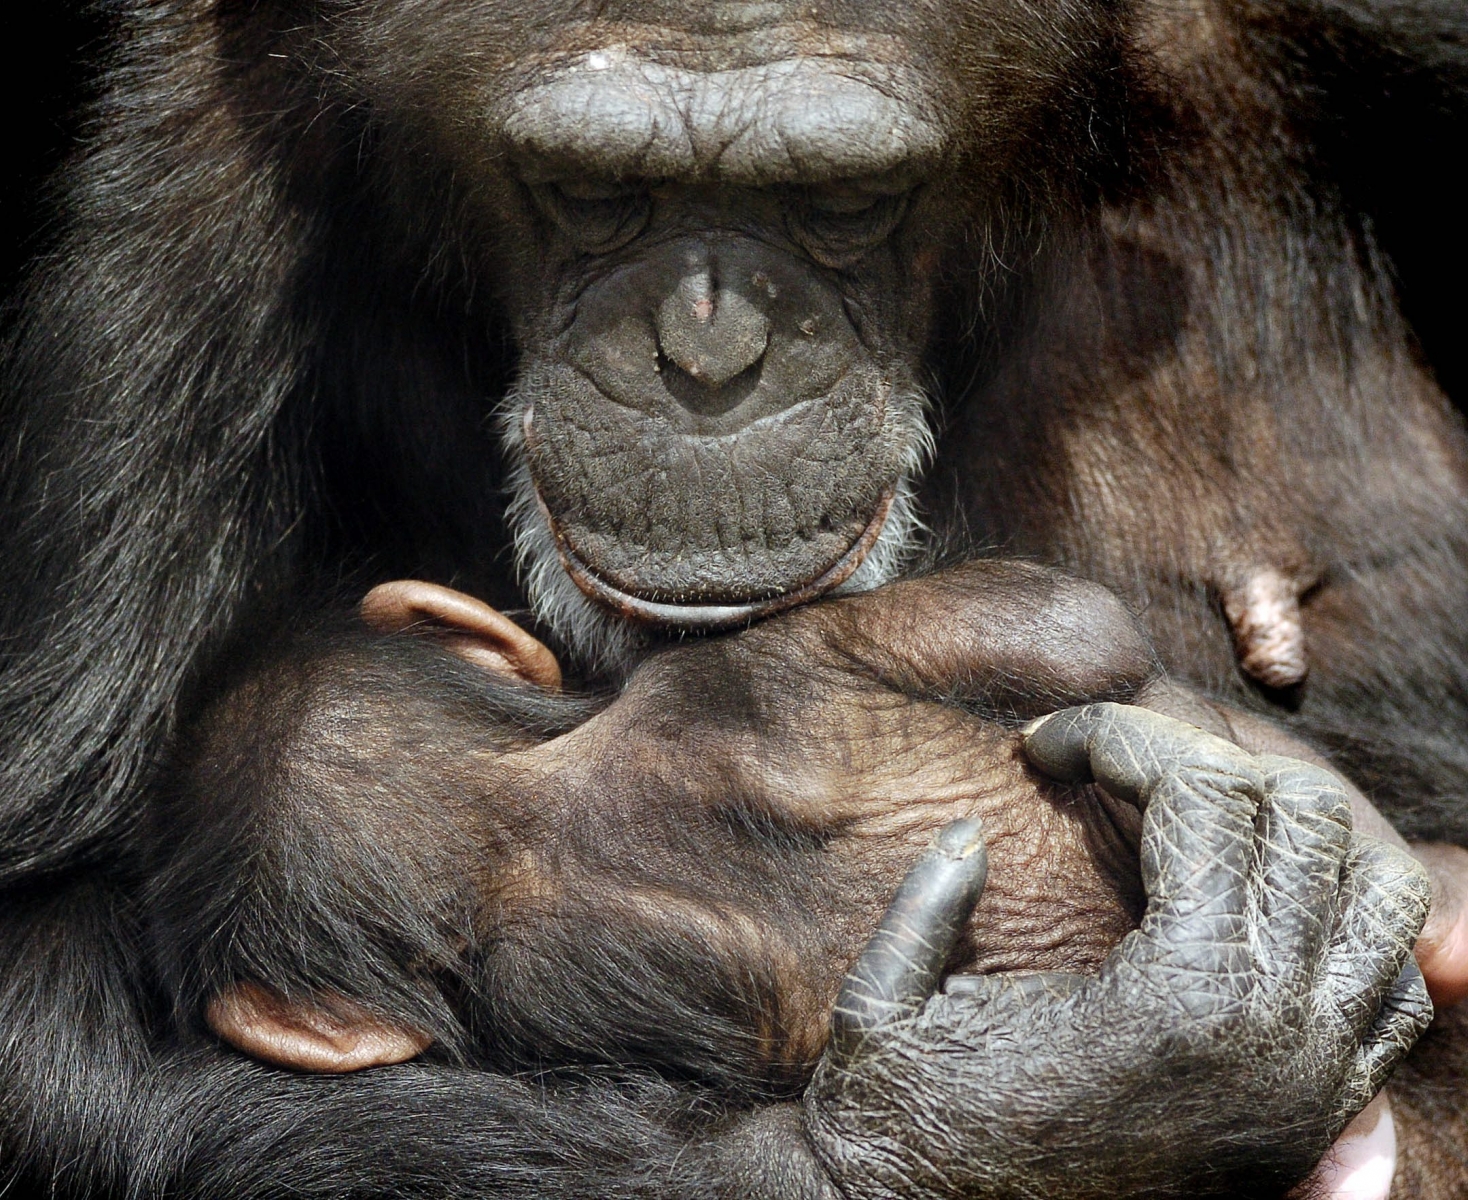 Jodi a mother chimpanzee,  holds her one-month-old baby, at the Tulsa Zoo in Tulsa, Okla., Wednesday, March 21, 2007.  (KEYSTONE/AP Photo/Tulsa World, Tom Gilbert)  USA BABY CHIMP